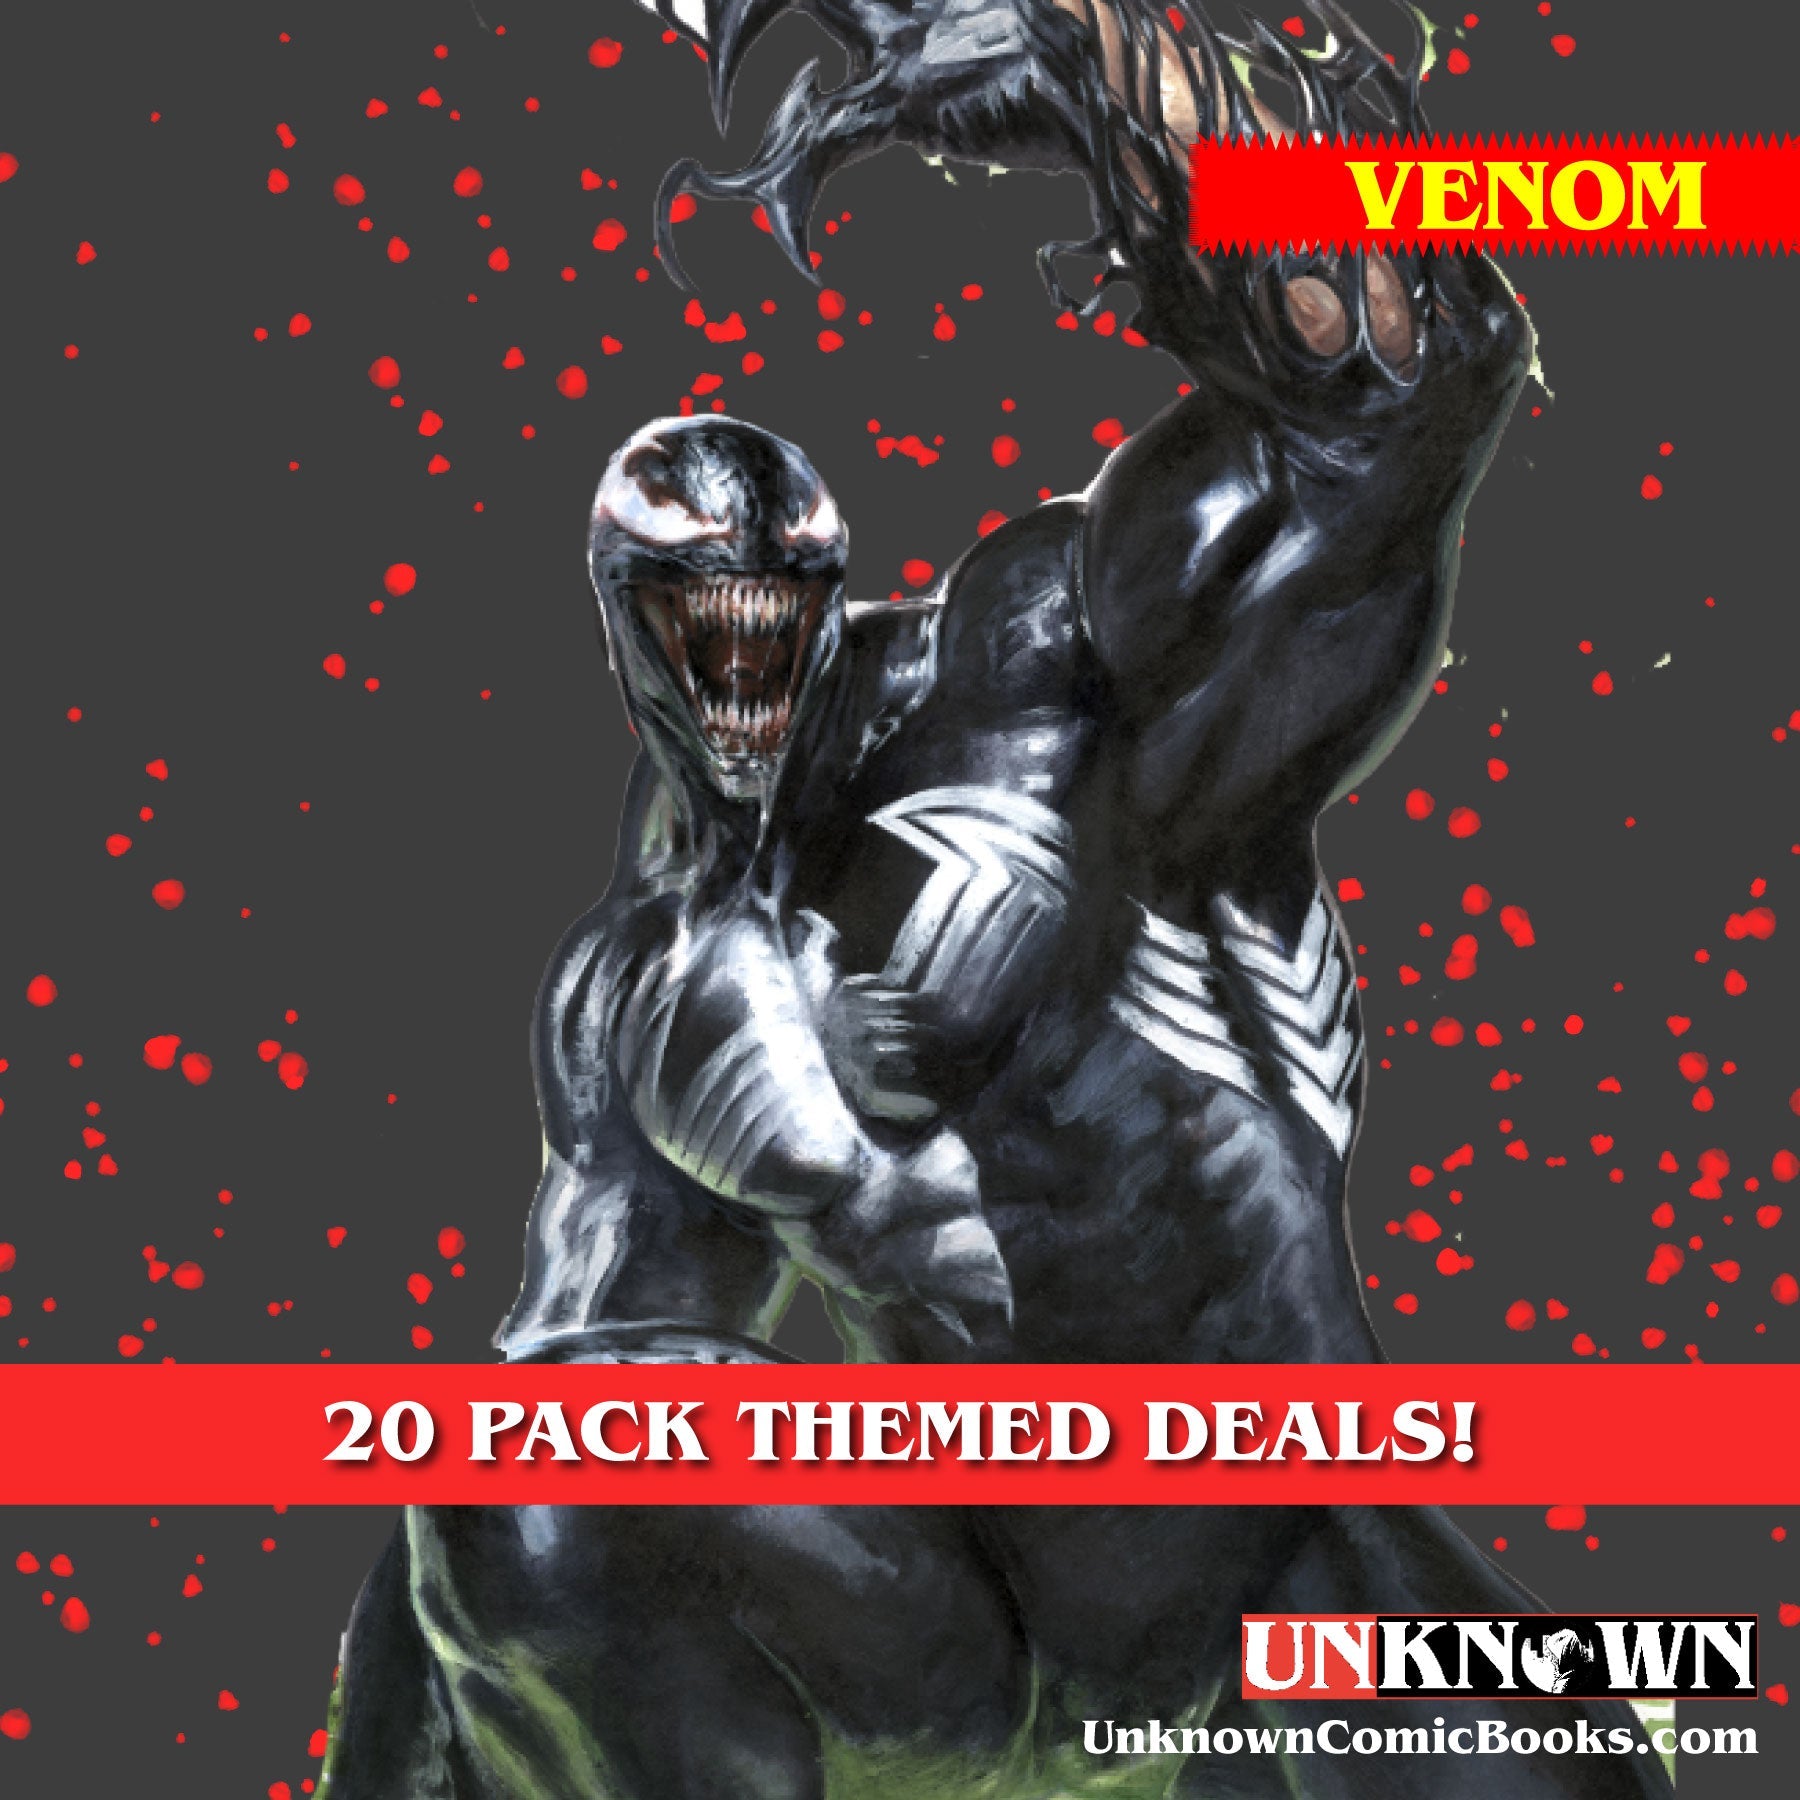 [20 PACK] UNKNOWN COMICS MYSTERY THEMED 👉VENOM EXCLUSIVE BOX 👉TRADE (01/11/2023)